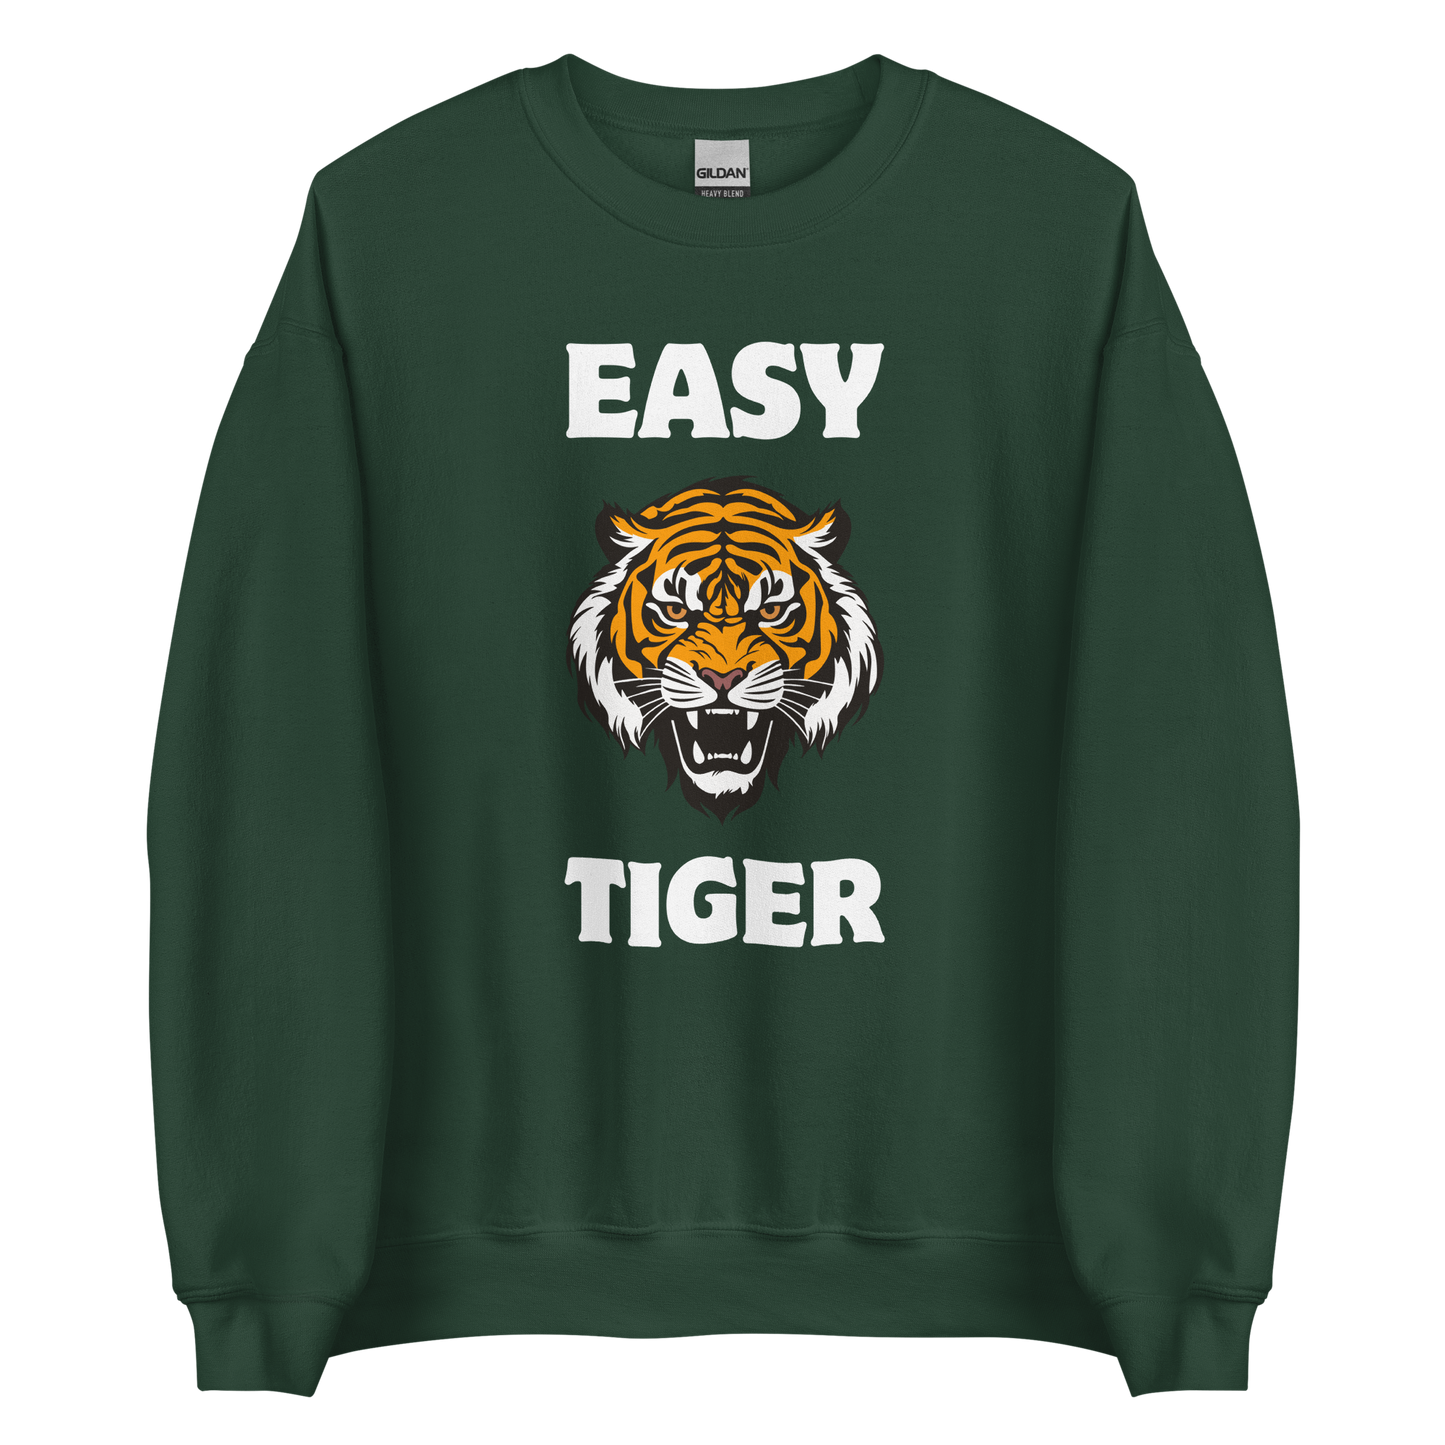 Forest Green Tiger Sweatshirt featuring a Easy Tiger graphic on the chest - Funny Graphic Tiger Sweatshirts - Boozy Fox